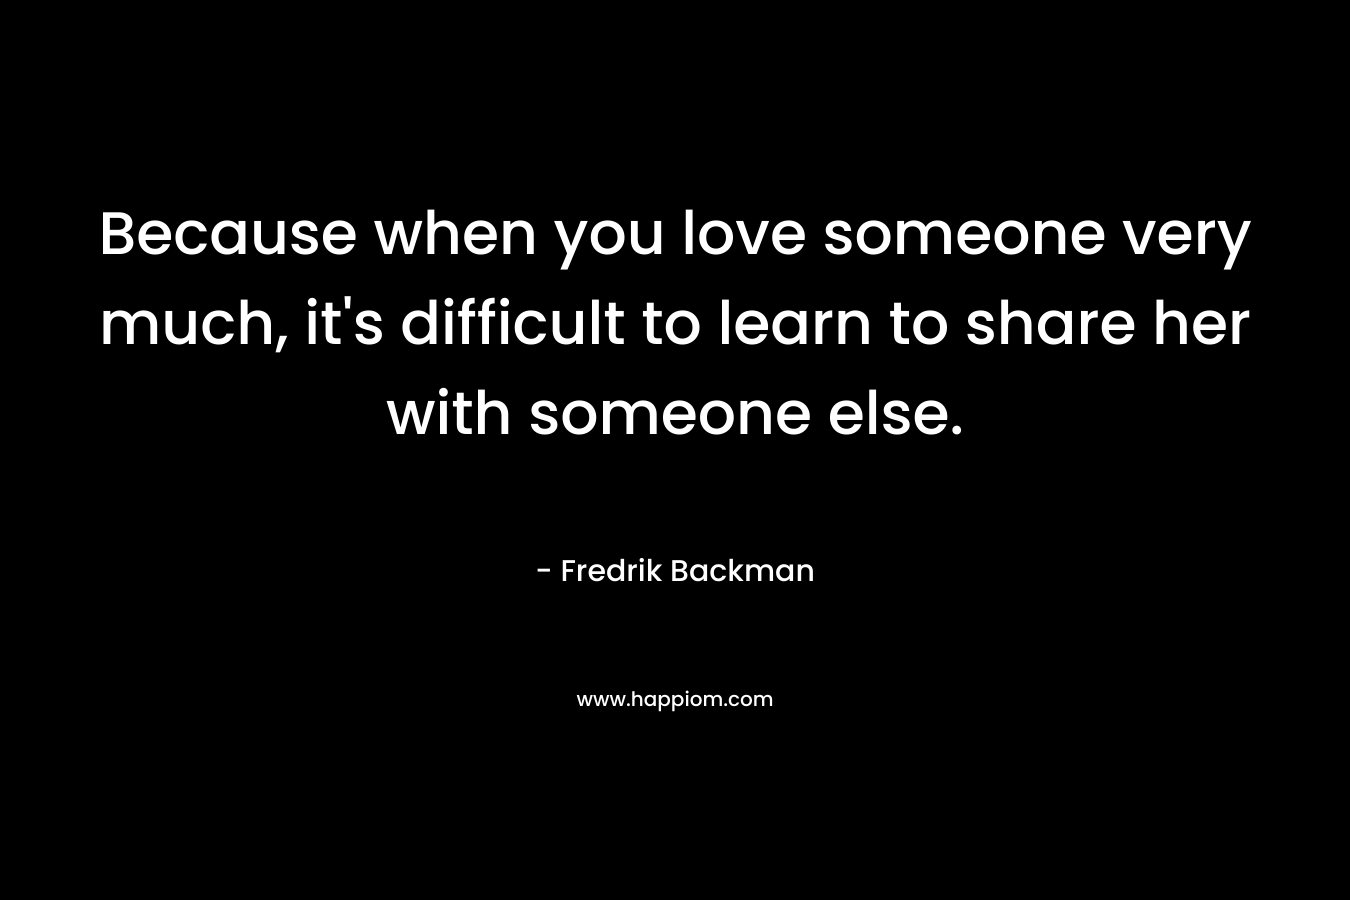 Because when you love someone very much, it’s difficult to learn to share her with someone else. – Fredrik Backman